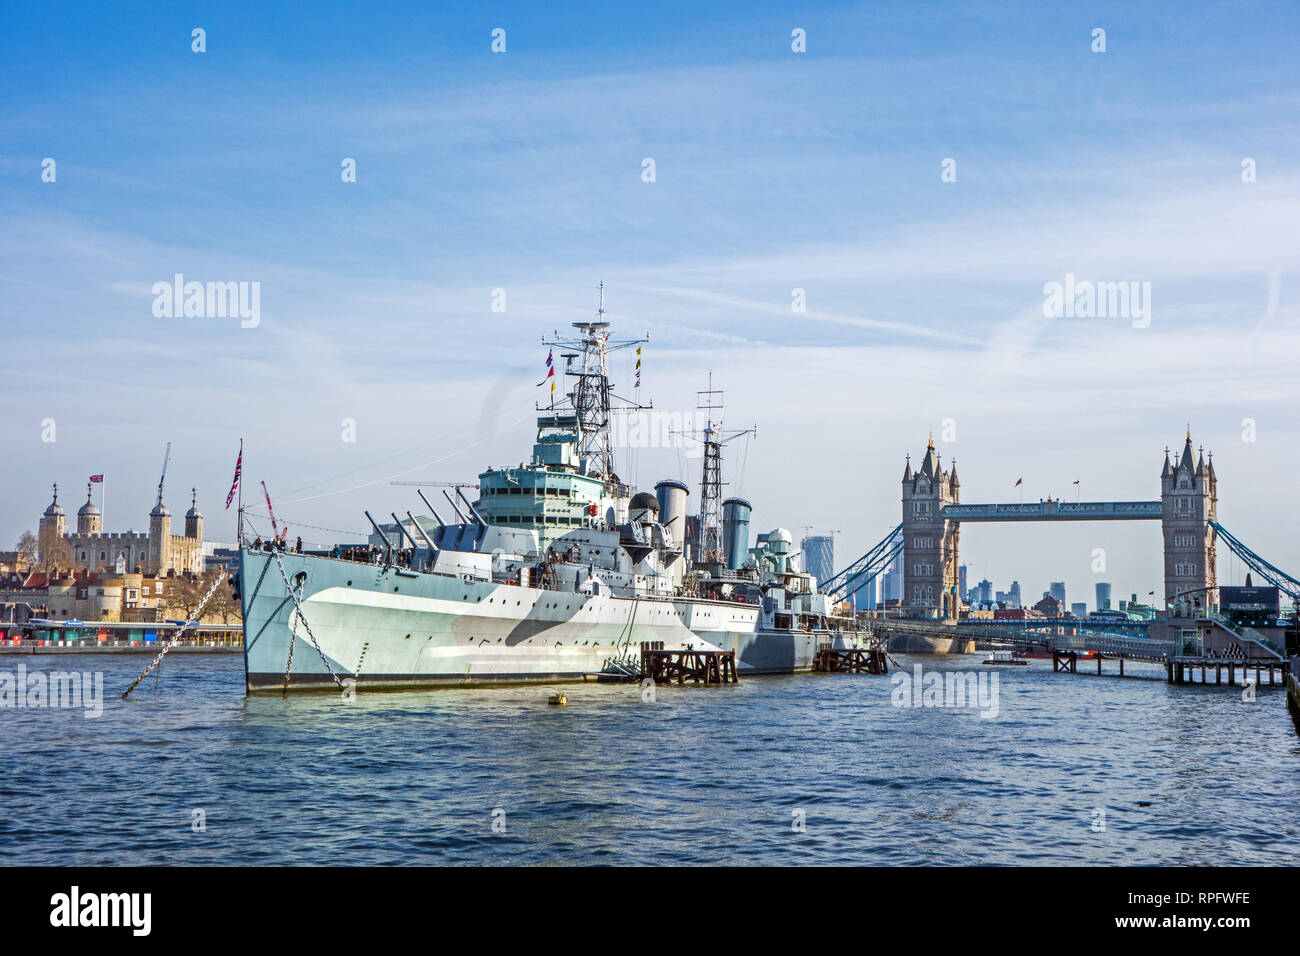 HMS Belfast moored on the River Thames in front of Tower Bridge and the Tower of London Stock Photo